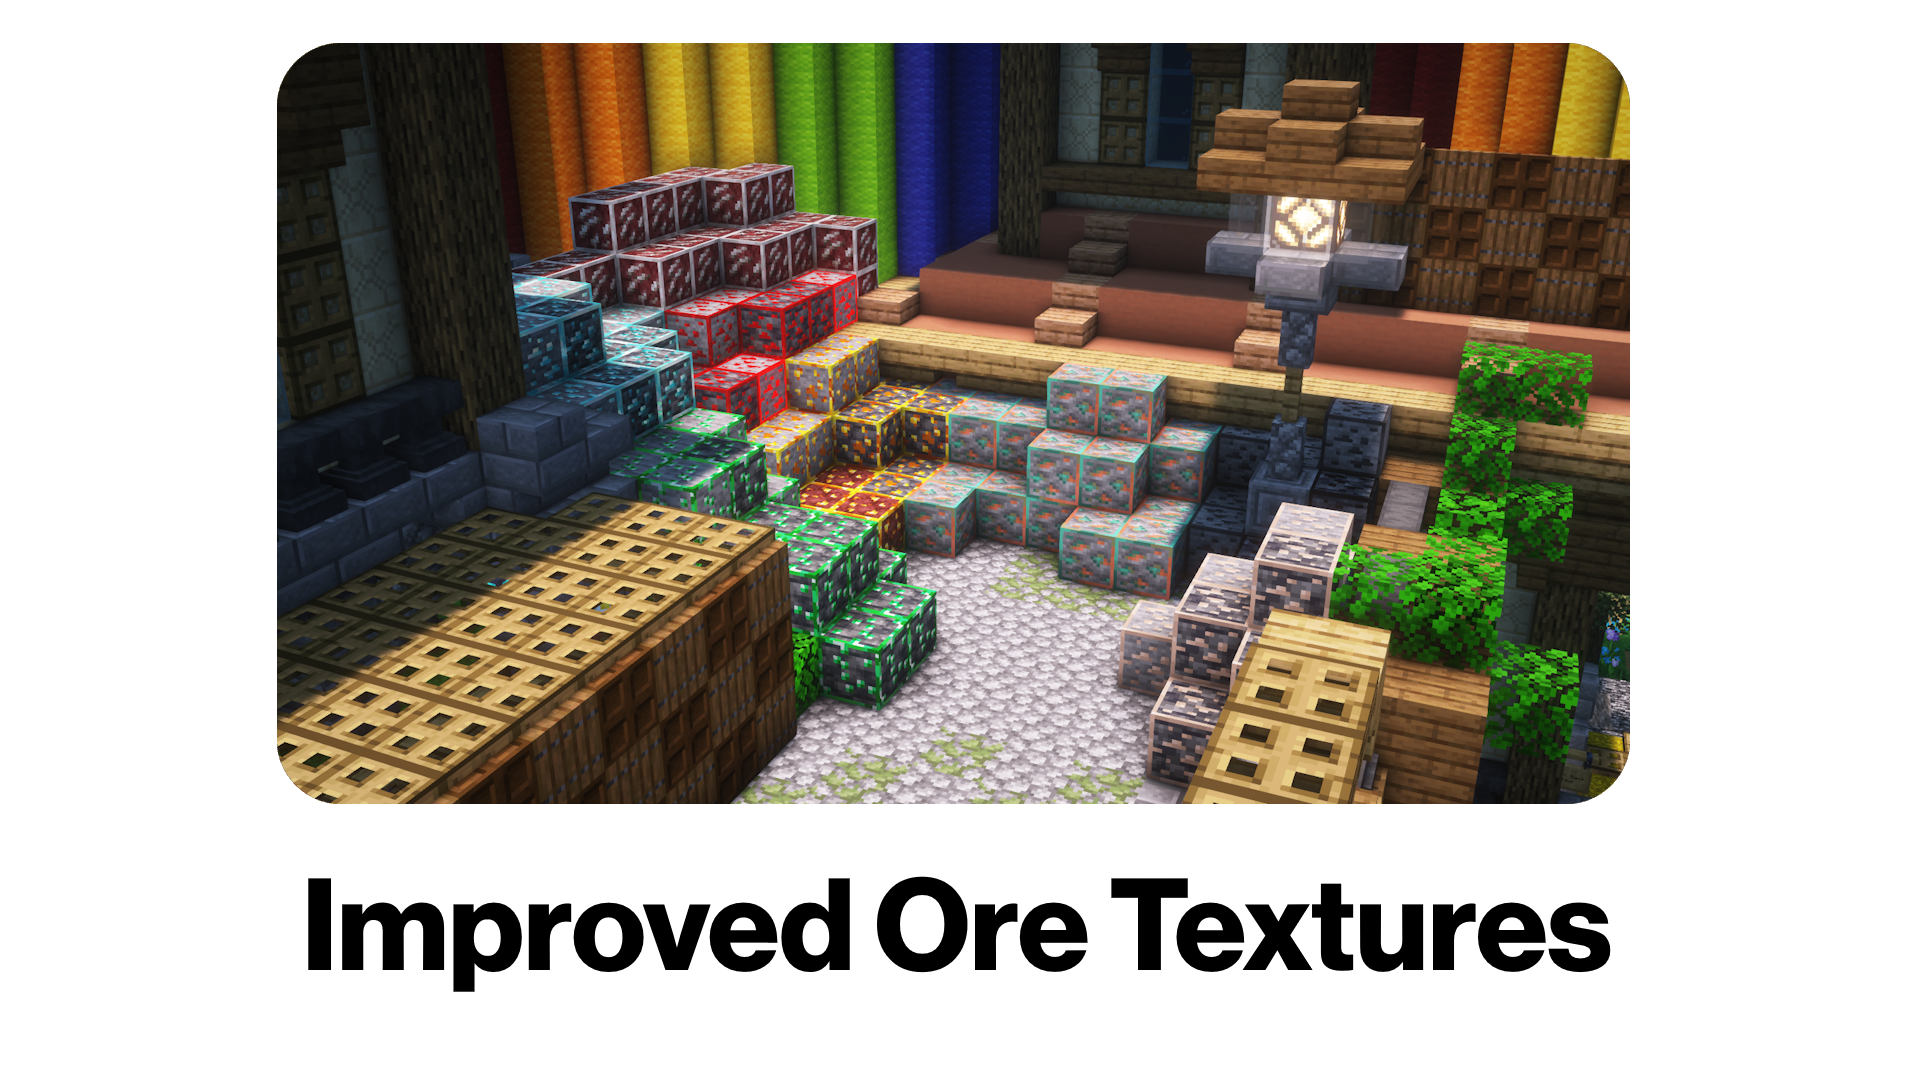 PixelPack improves the Ore Textures, making them easier to see.